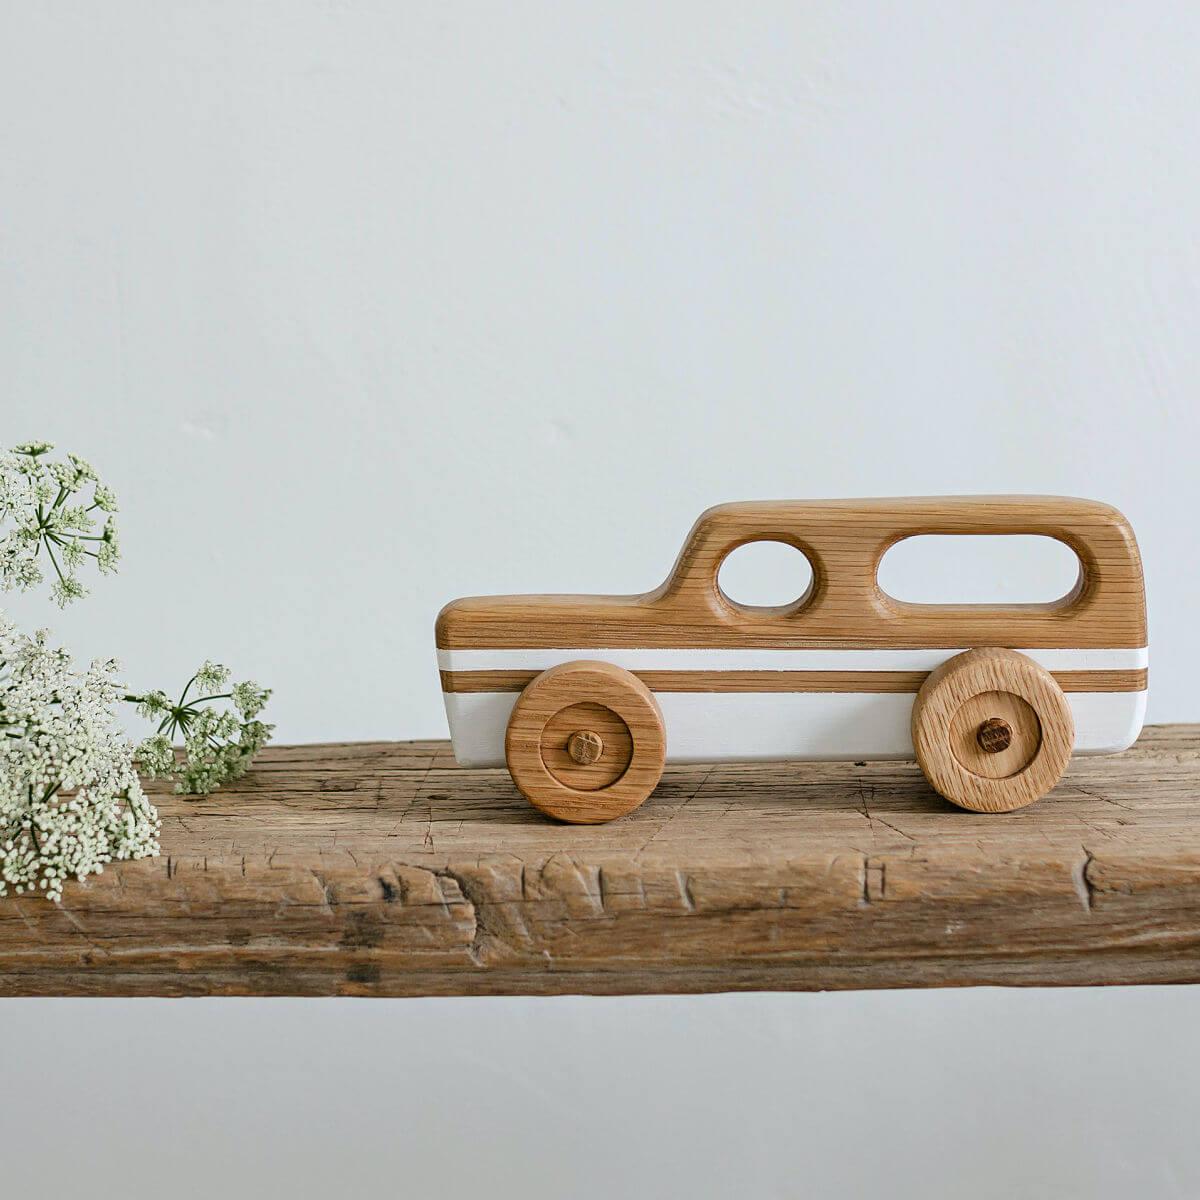 Traditional Wooden Toys - Blue Brontide UK